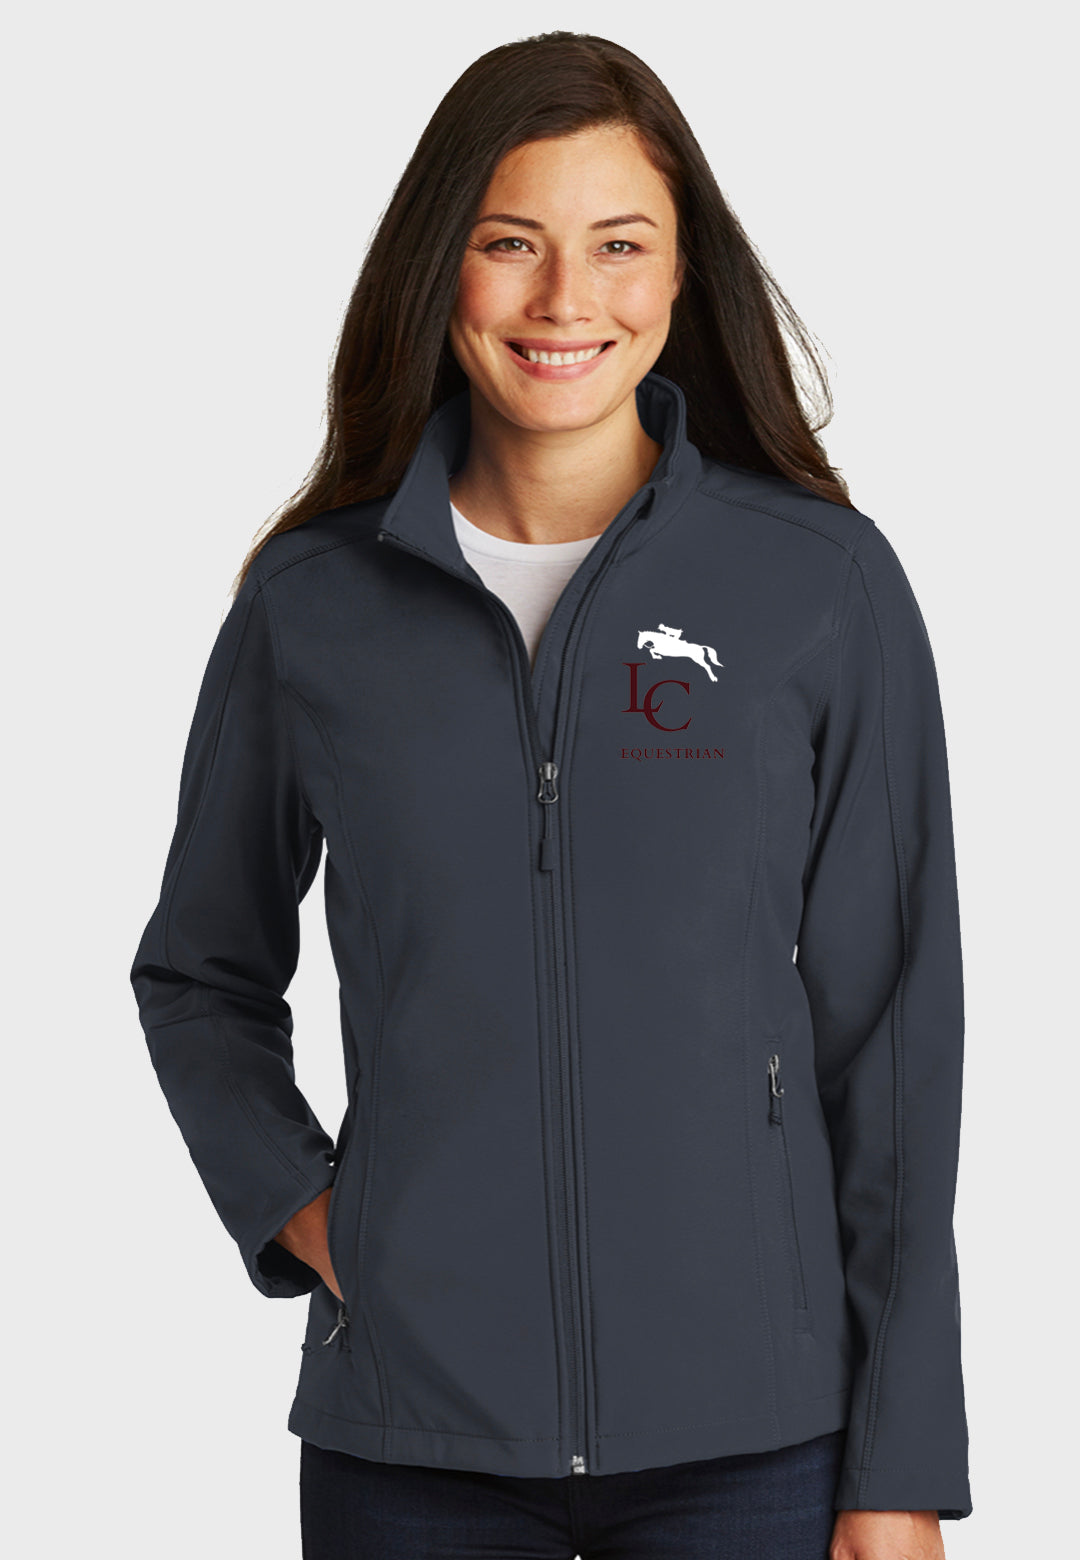 Loomis Chaffe Equestrian Port Authority® Core Ladies Soft Shell Jacket